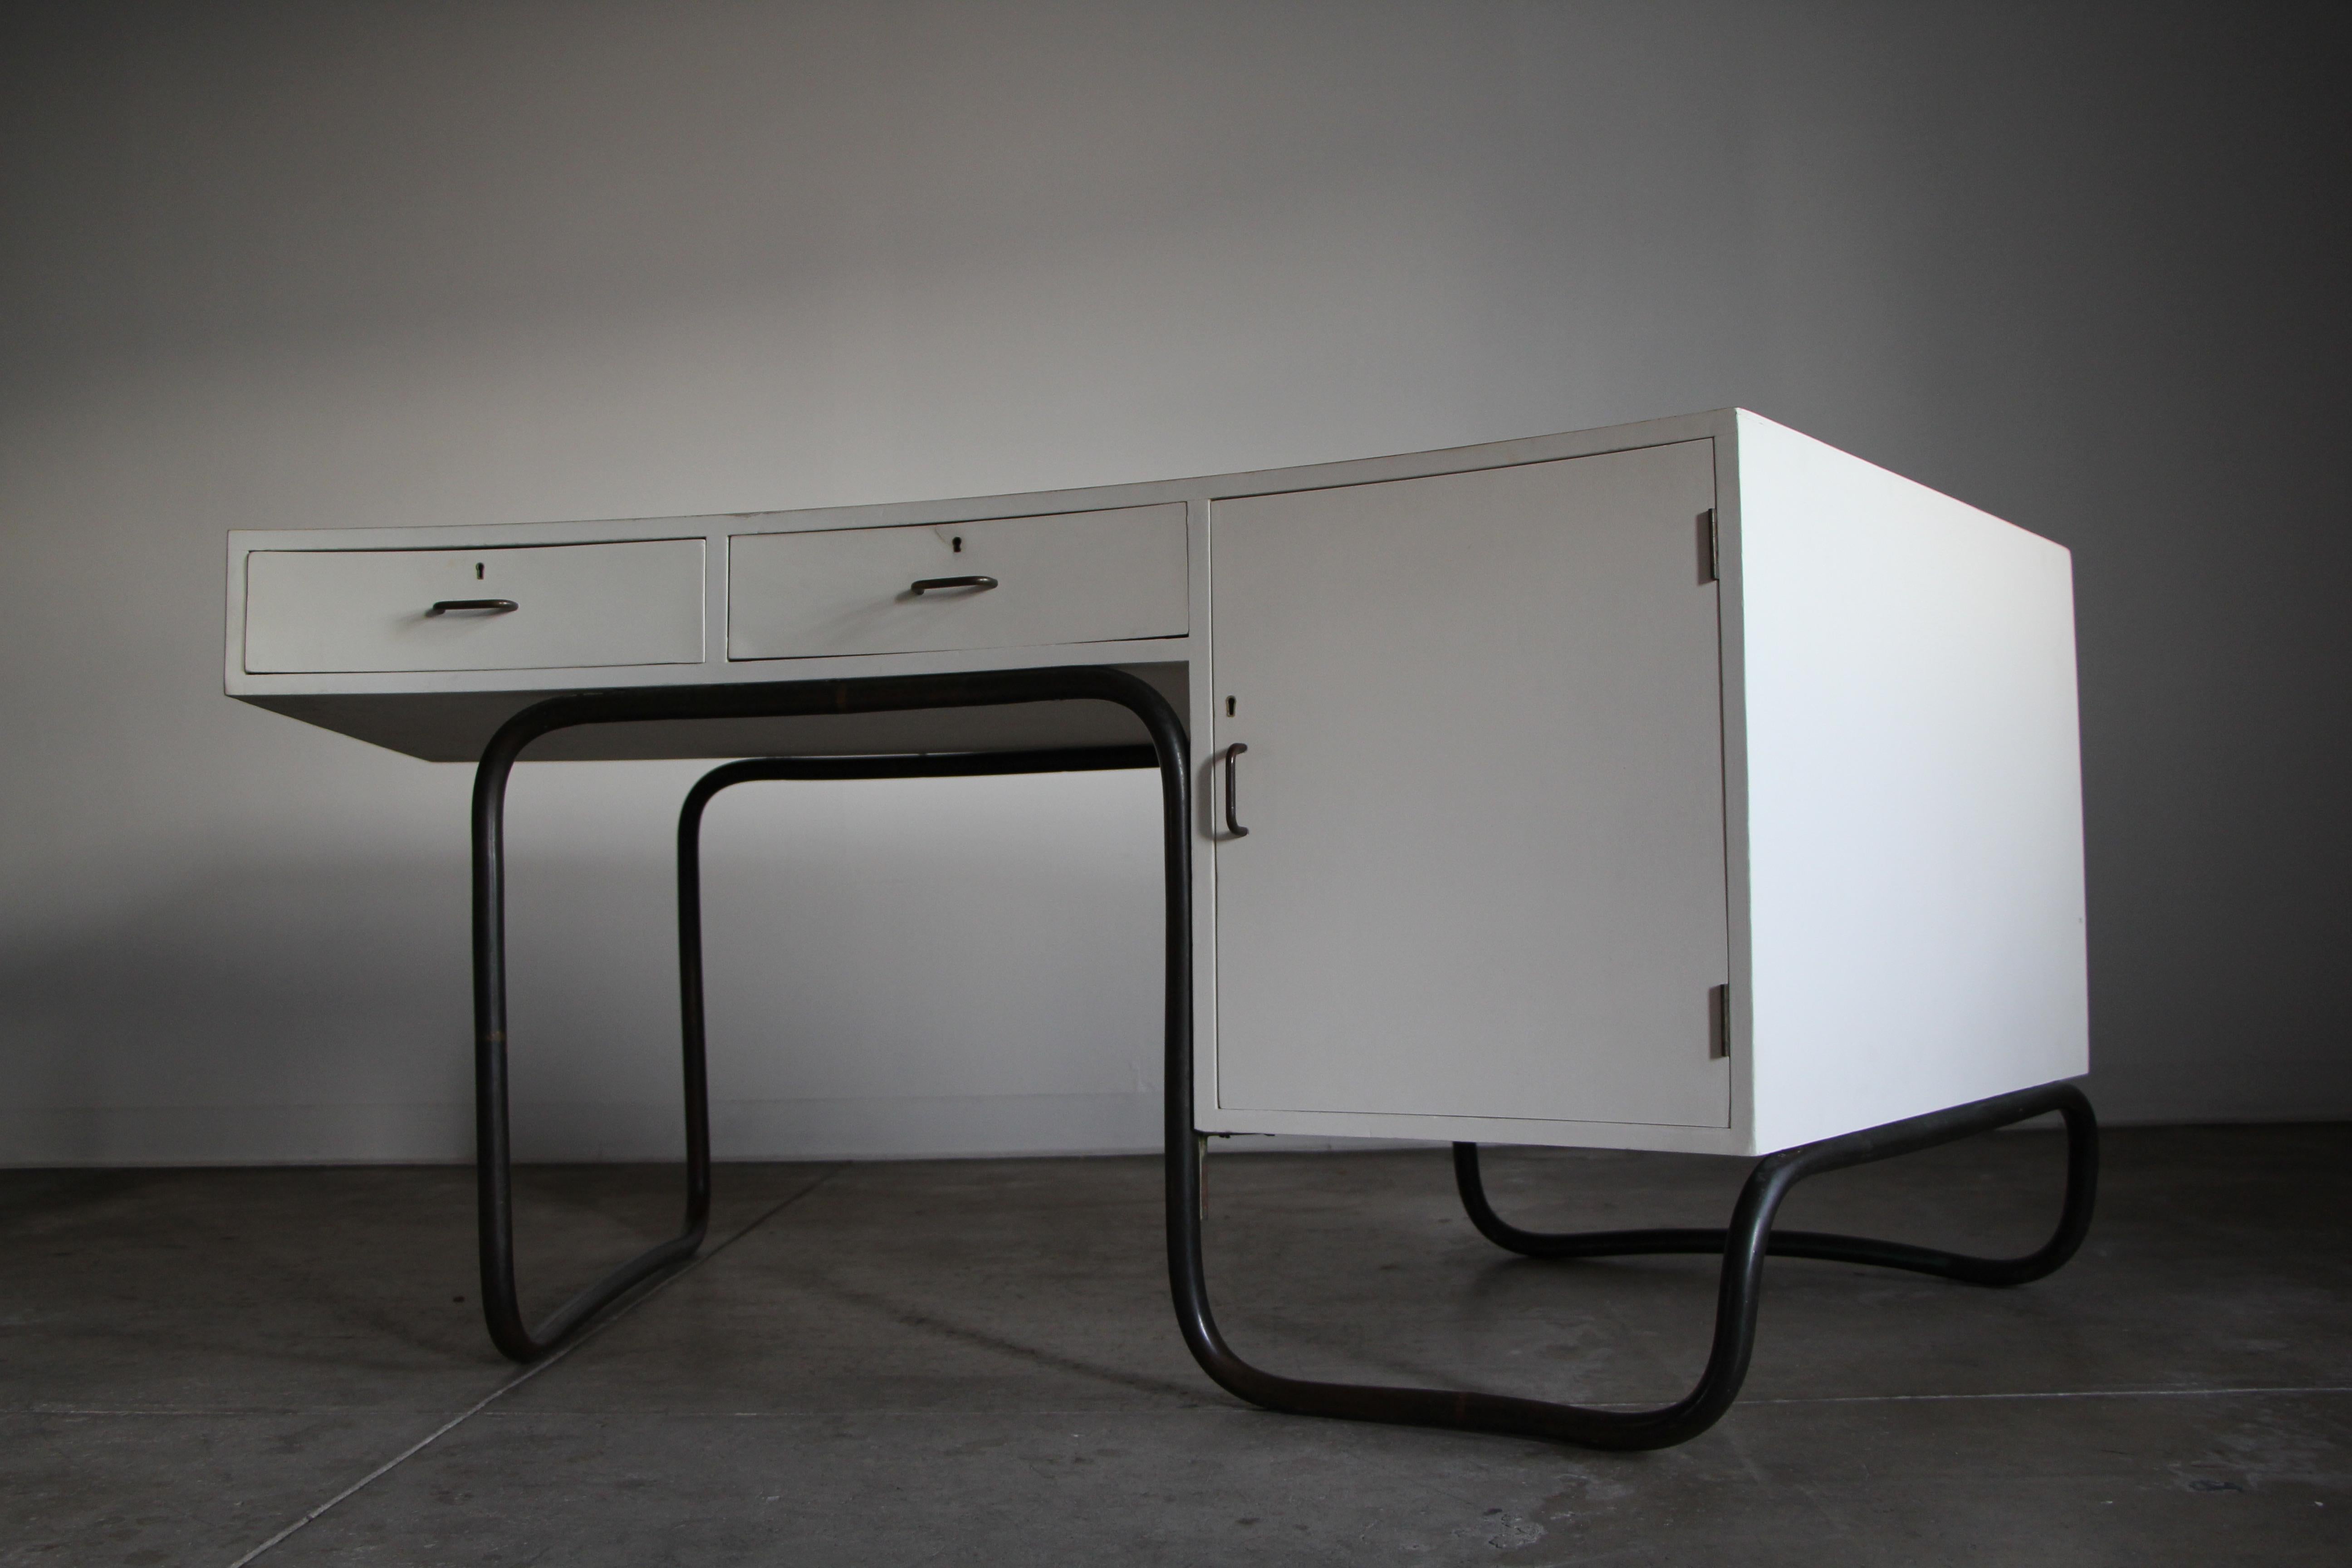 Serge Chermayeff One-of-a-Kind Curved Desk from the BBC Building 1930s For Sale 1